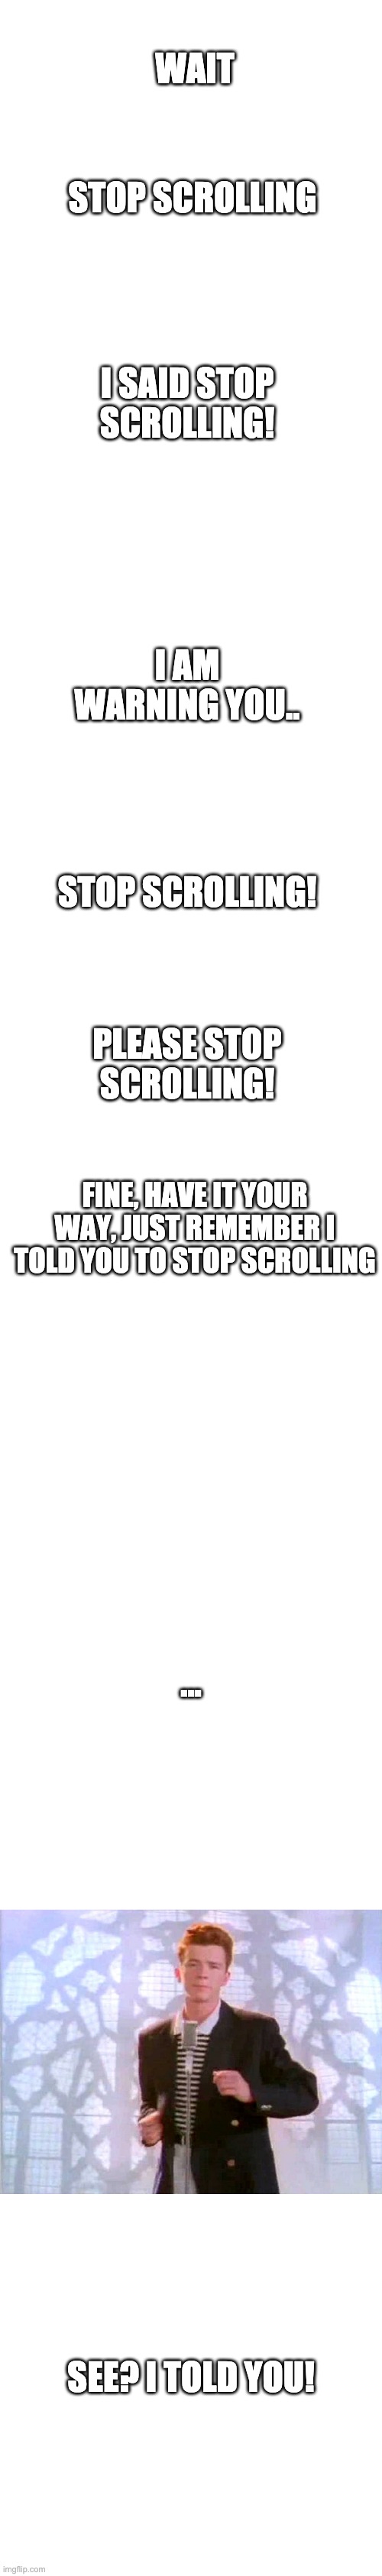 psst hey you stop scrolling meme know your meme